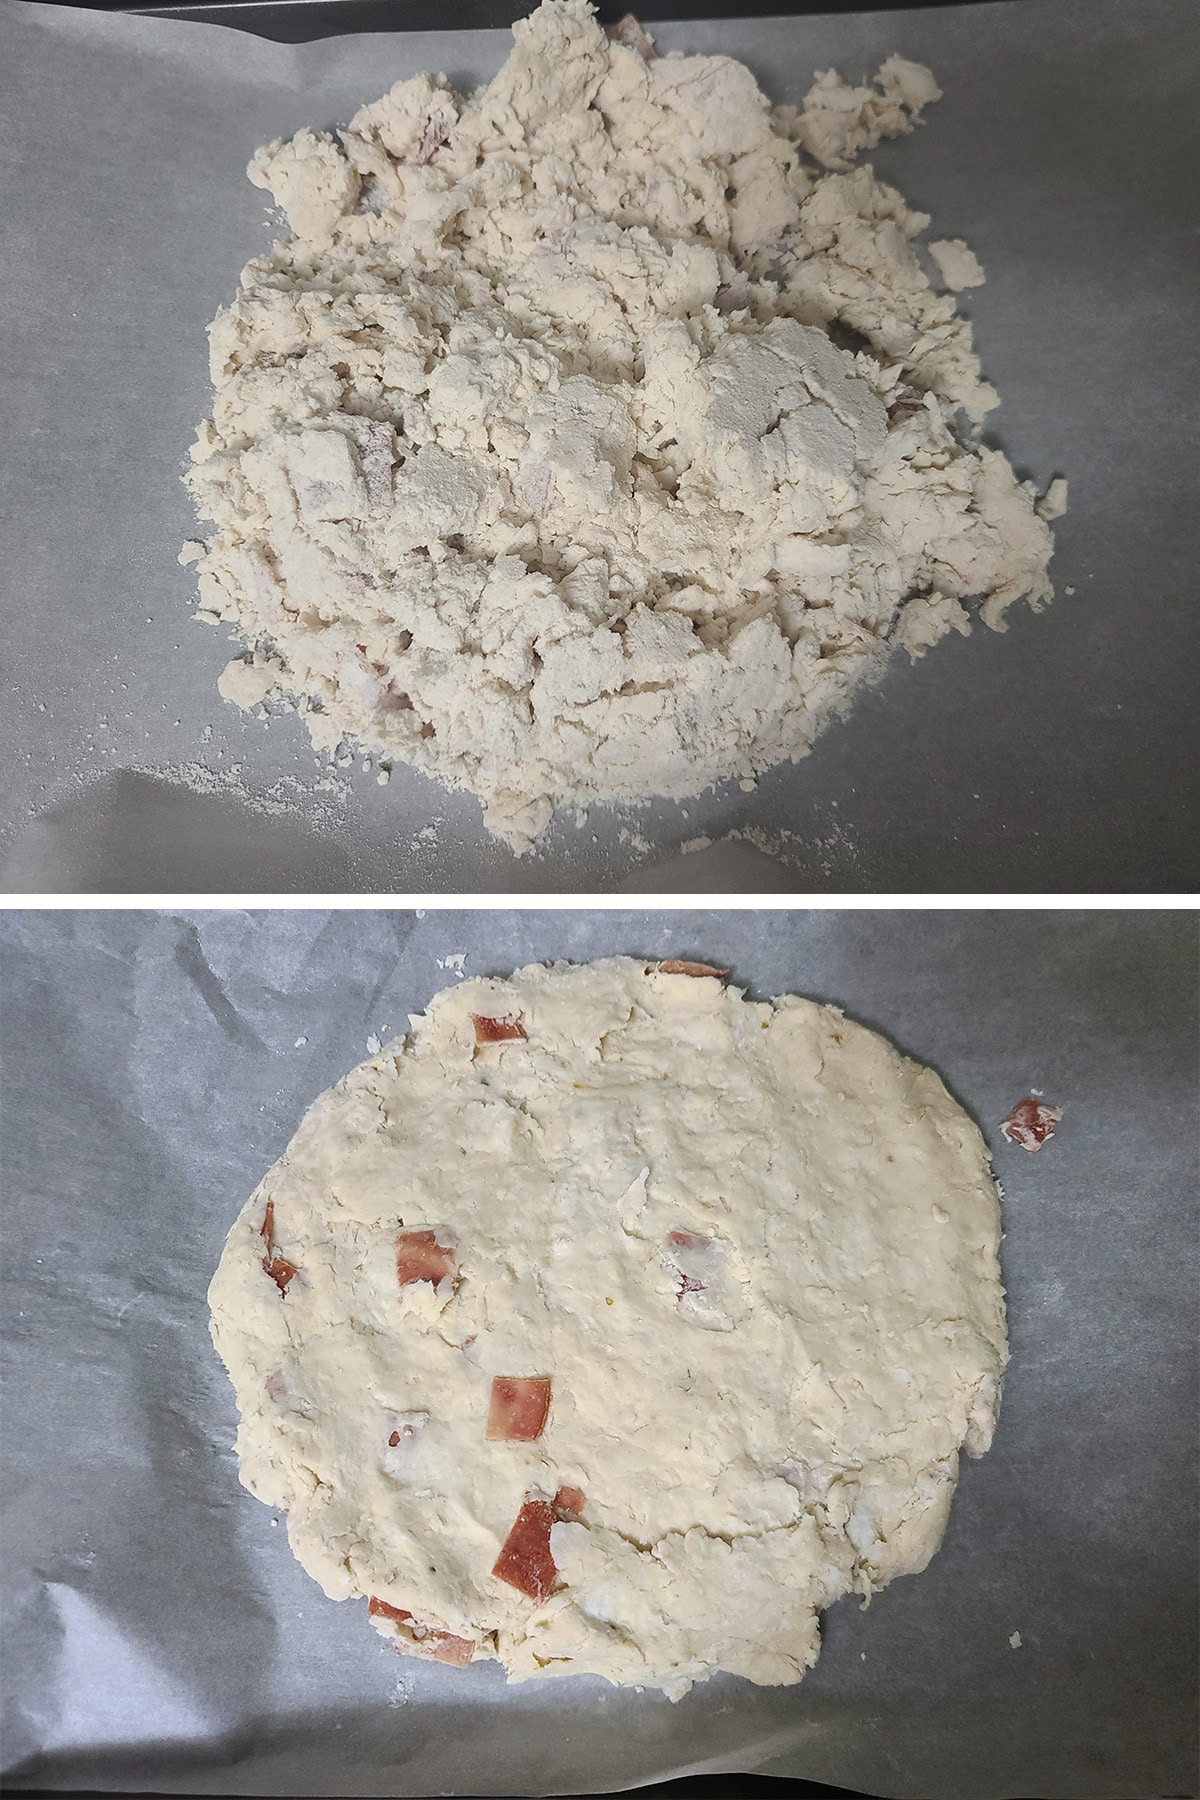 A 2 part image showing the biscuit crust of the breakfast pizza being formed.